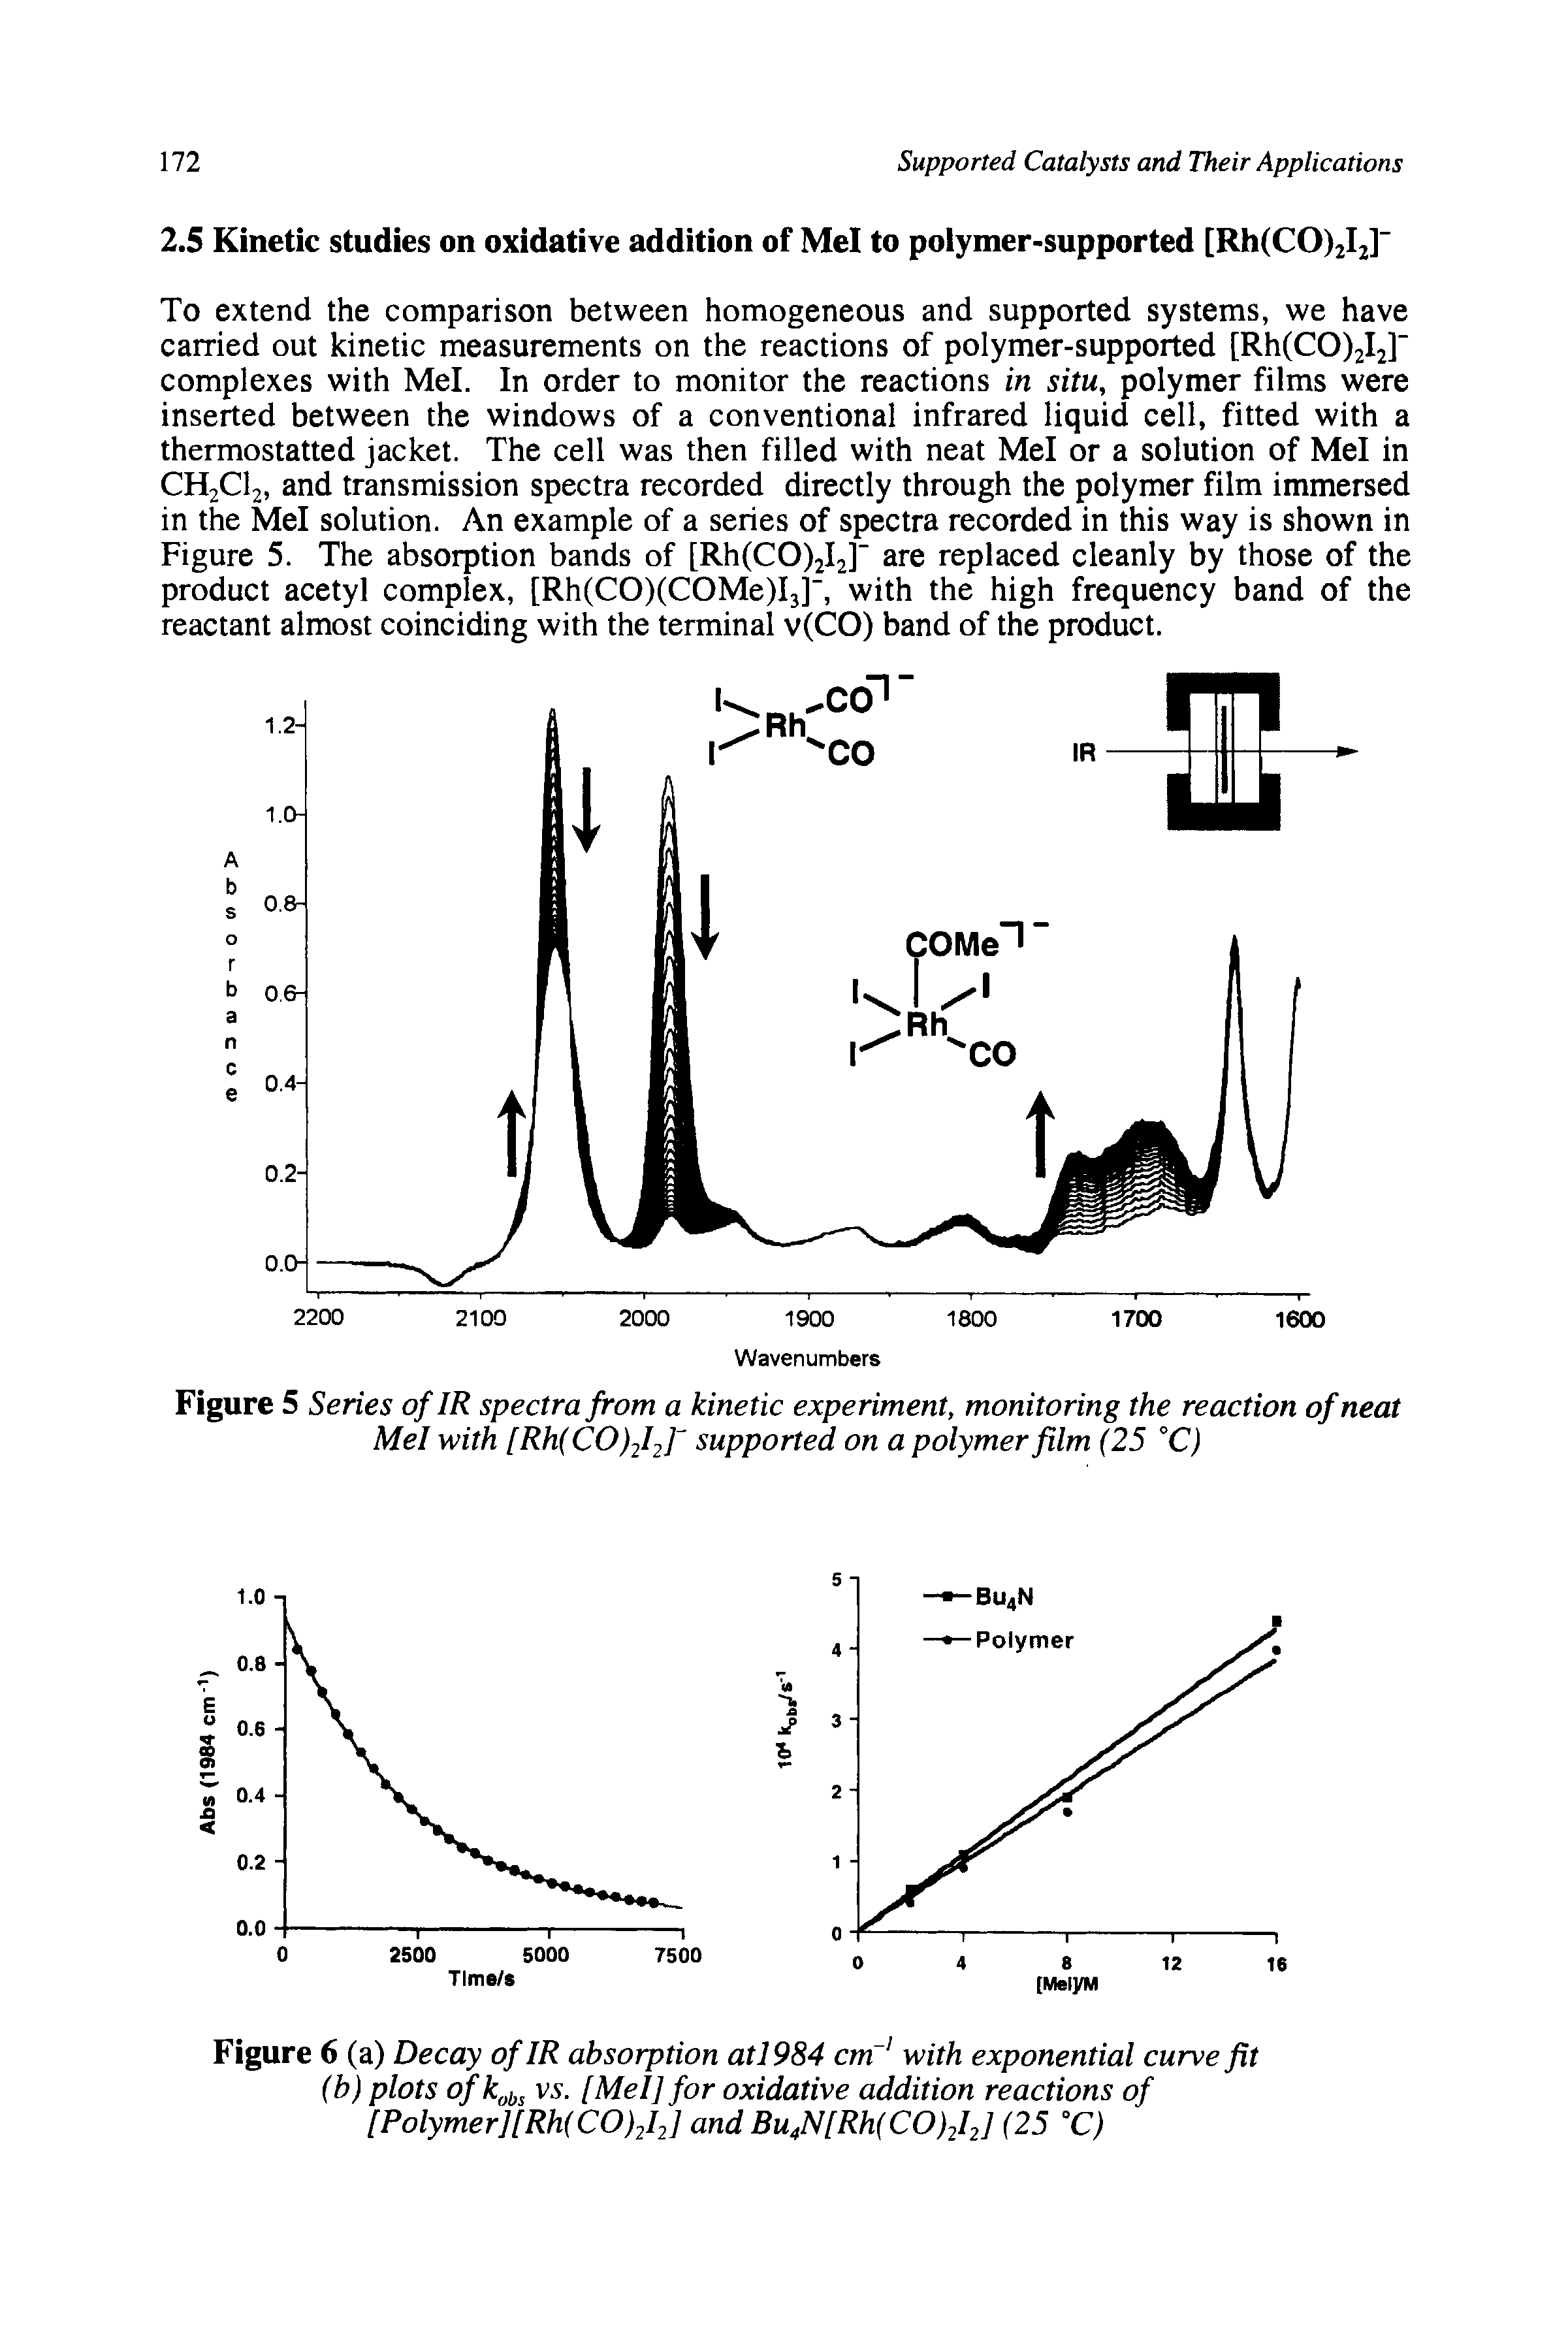 Figure 5 Series of IR spectra from a kinetic experiment, monitoring the reaction of neat Mel with [Rh( CO)2I2f supported on a polymer film (25 °C)...